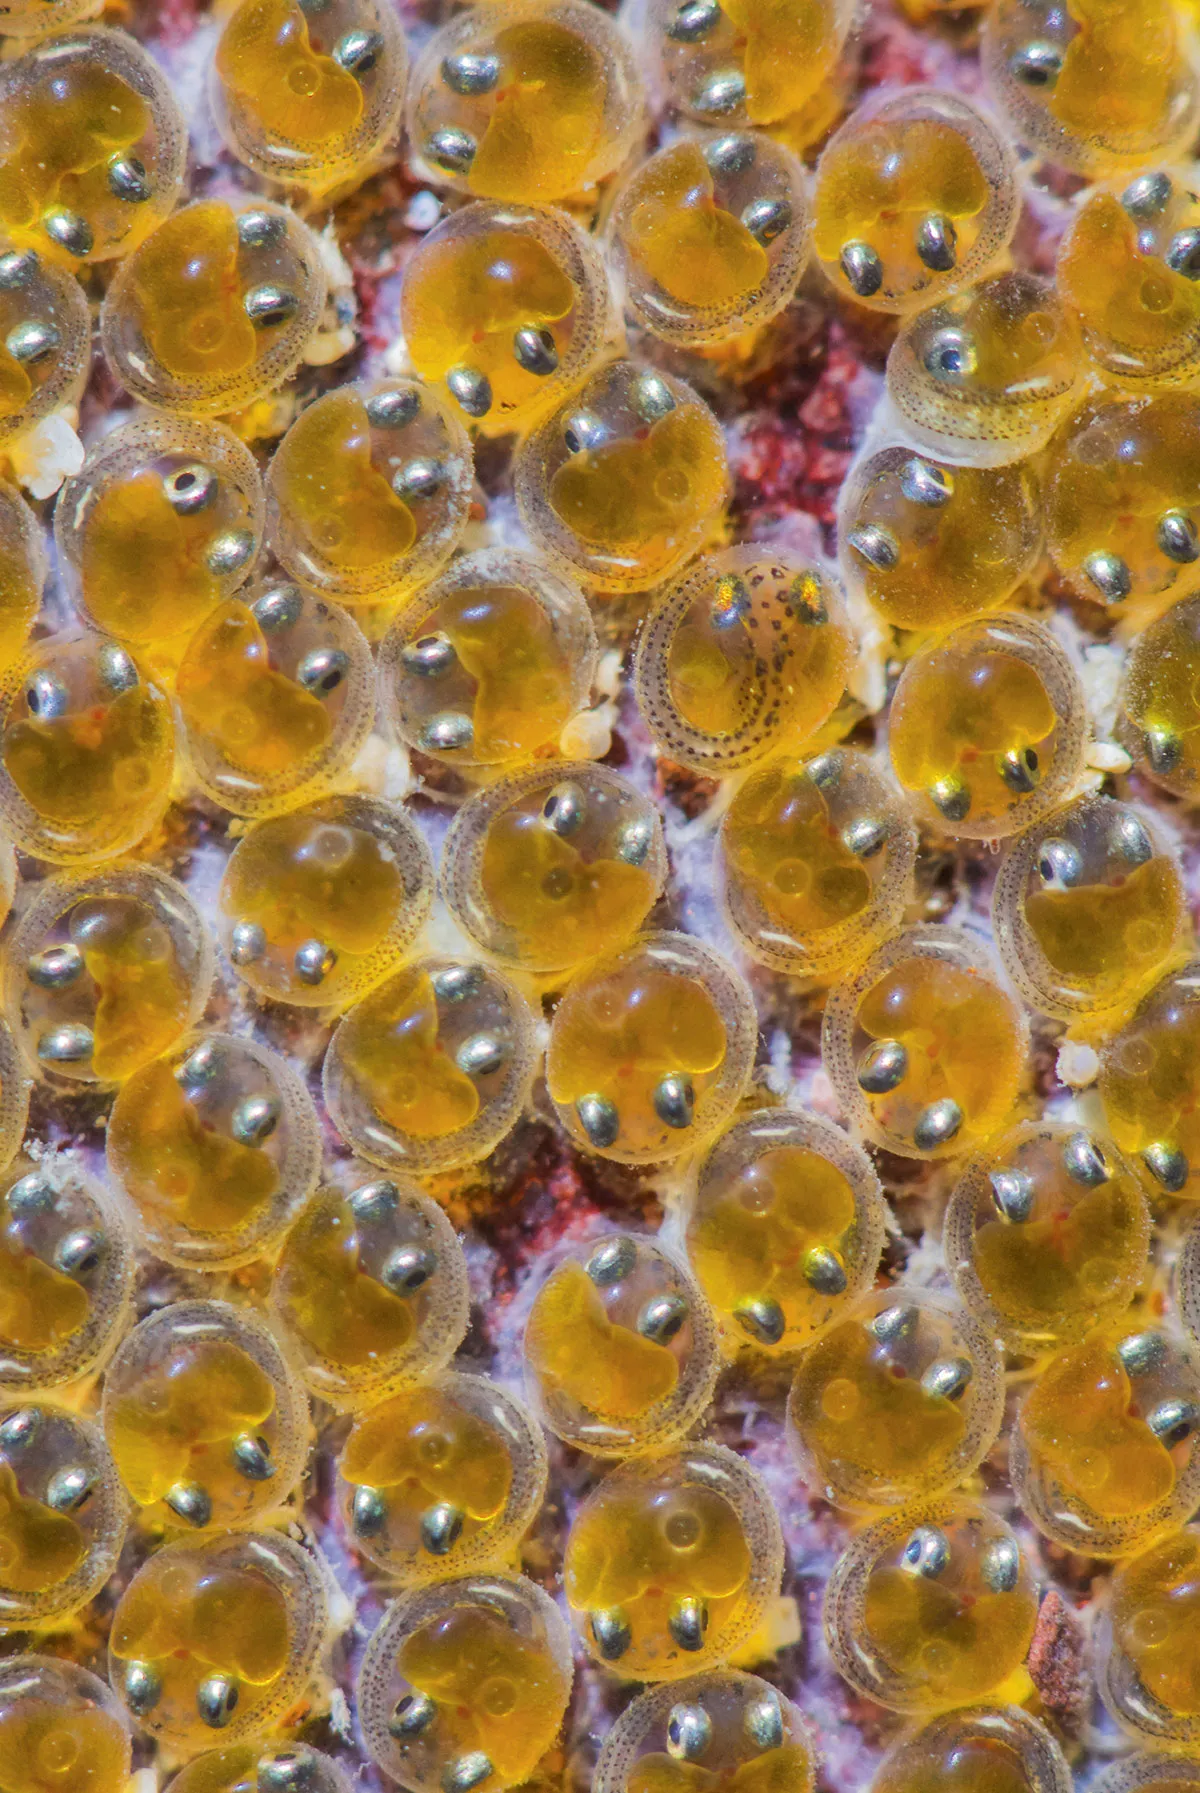 A cluster of clingfish eggs. They are mostly see-through, with a yellow yolk and two silver patches that look like eyes © Nico van Kappel/Buiten Beeld/Minden Pictures